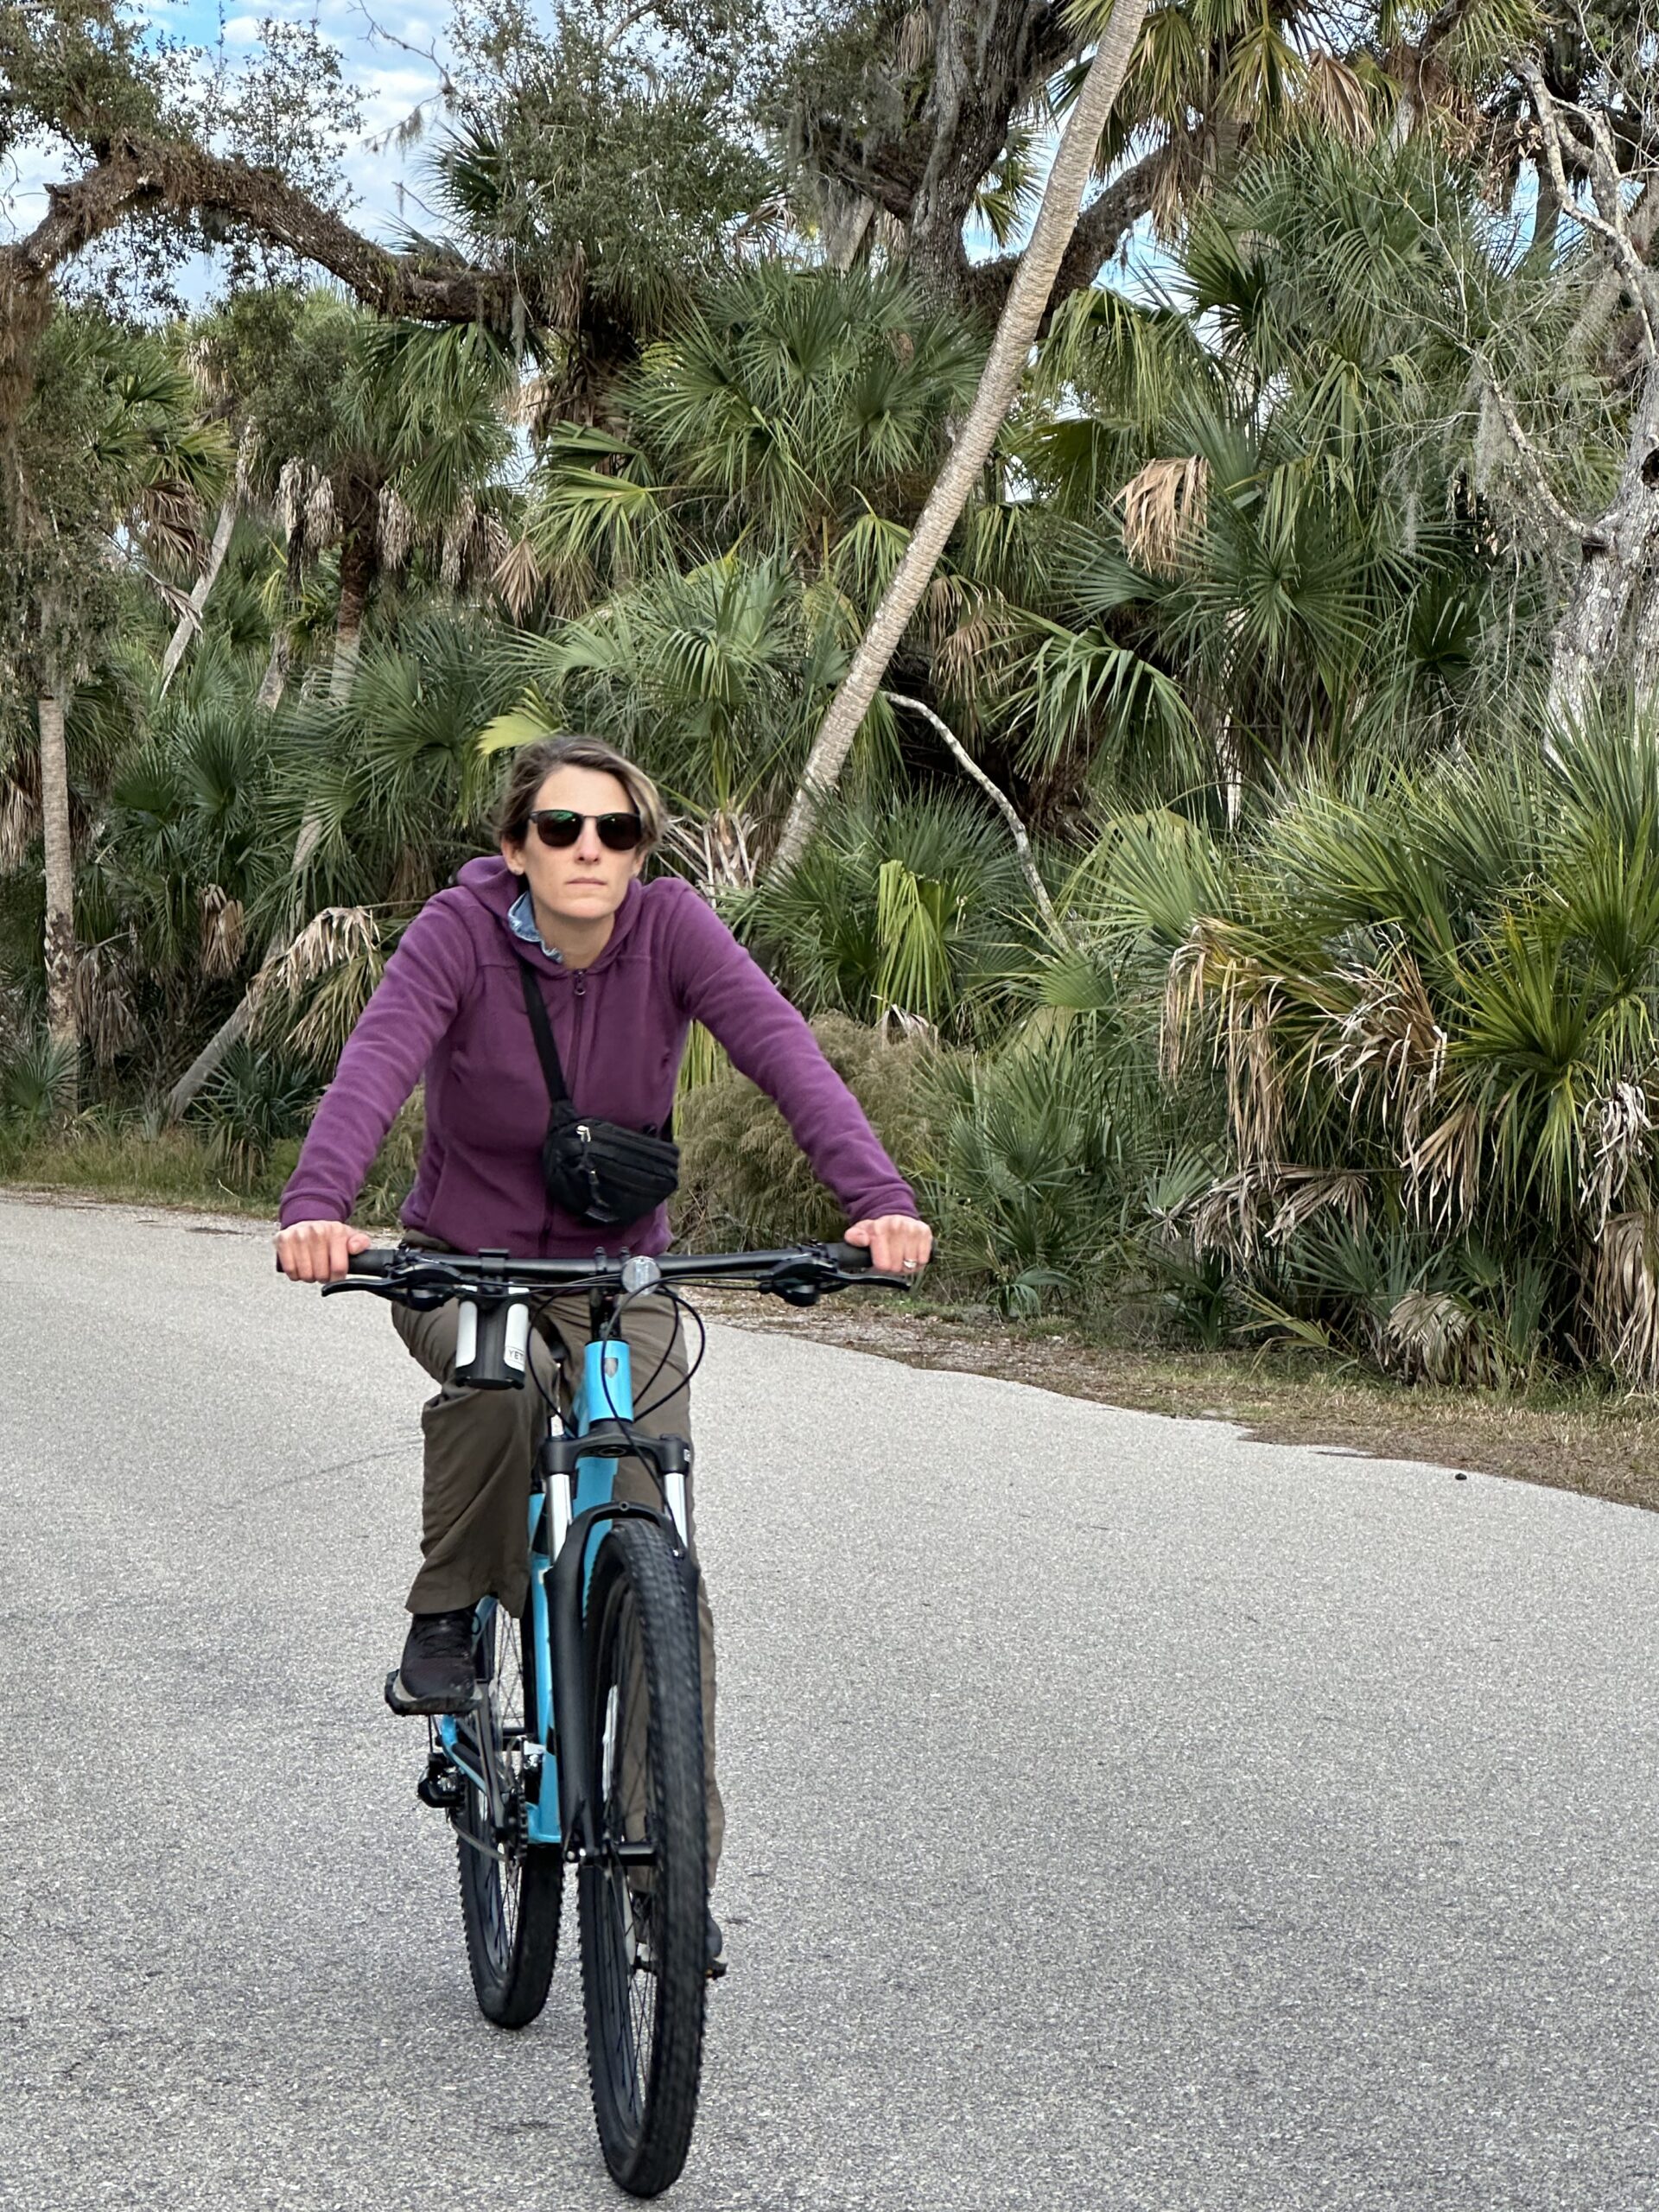 A woman riding a bike down a road with palm trees.